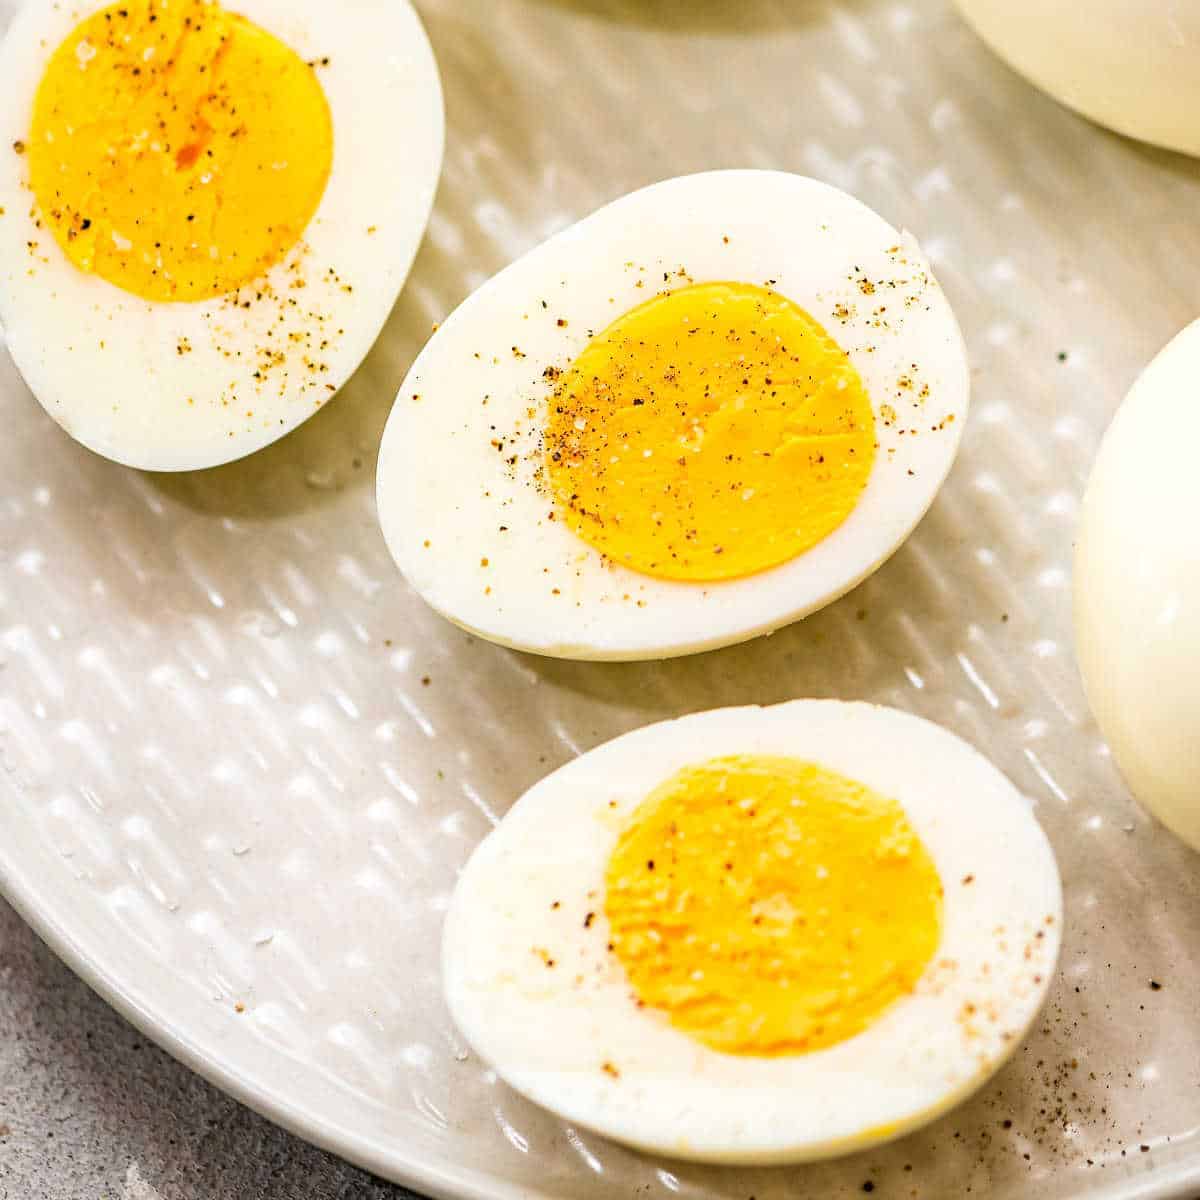 How to Make Hard Boiled Eggs